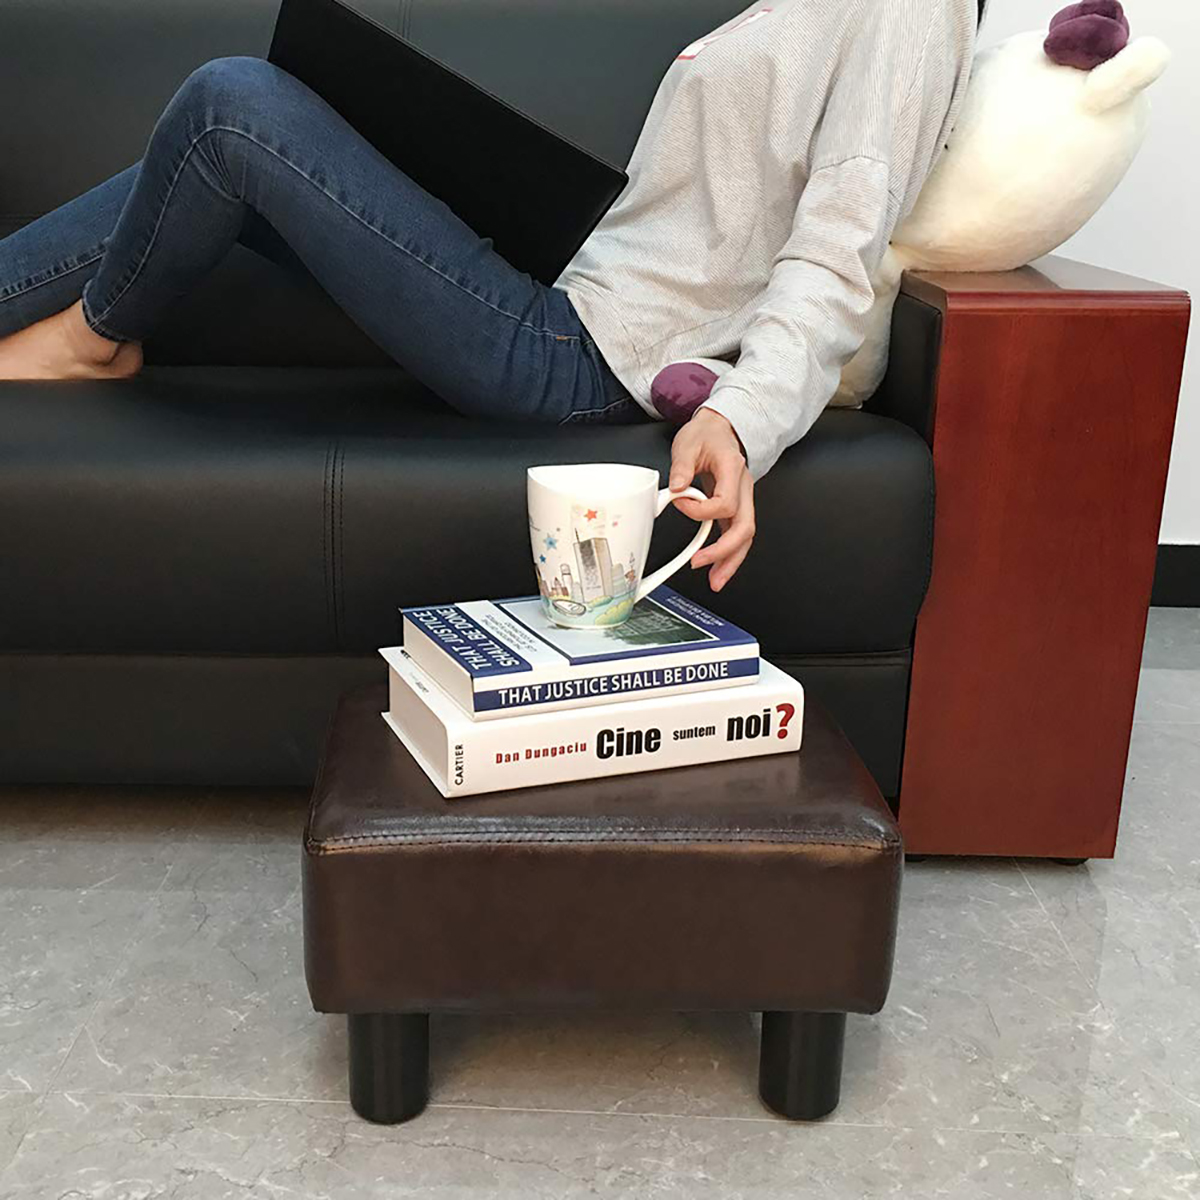 Modern Small Faux PU Leather Footstool Ottoman Footrest Stool Seat Chair Foot Stool,Brown - image 4 of 9